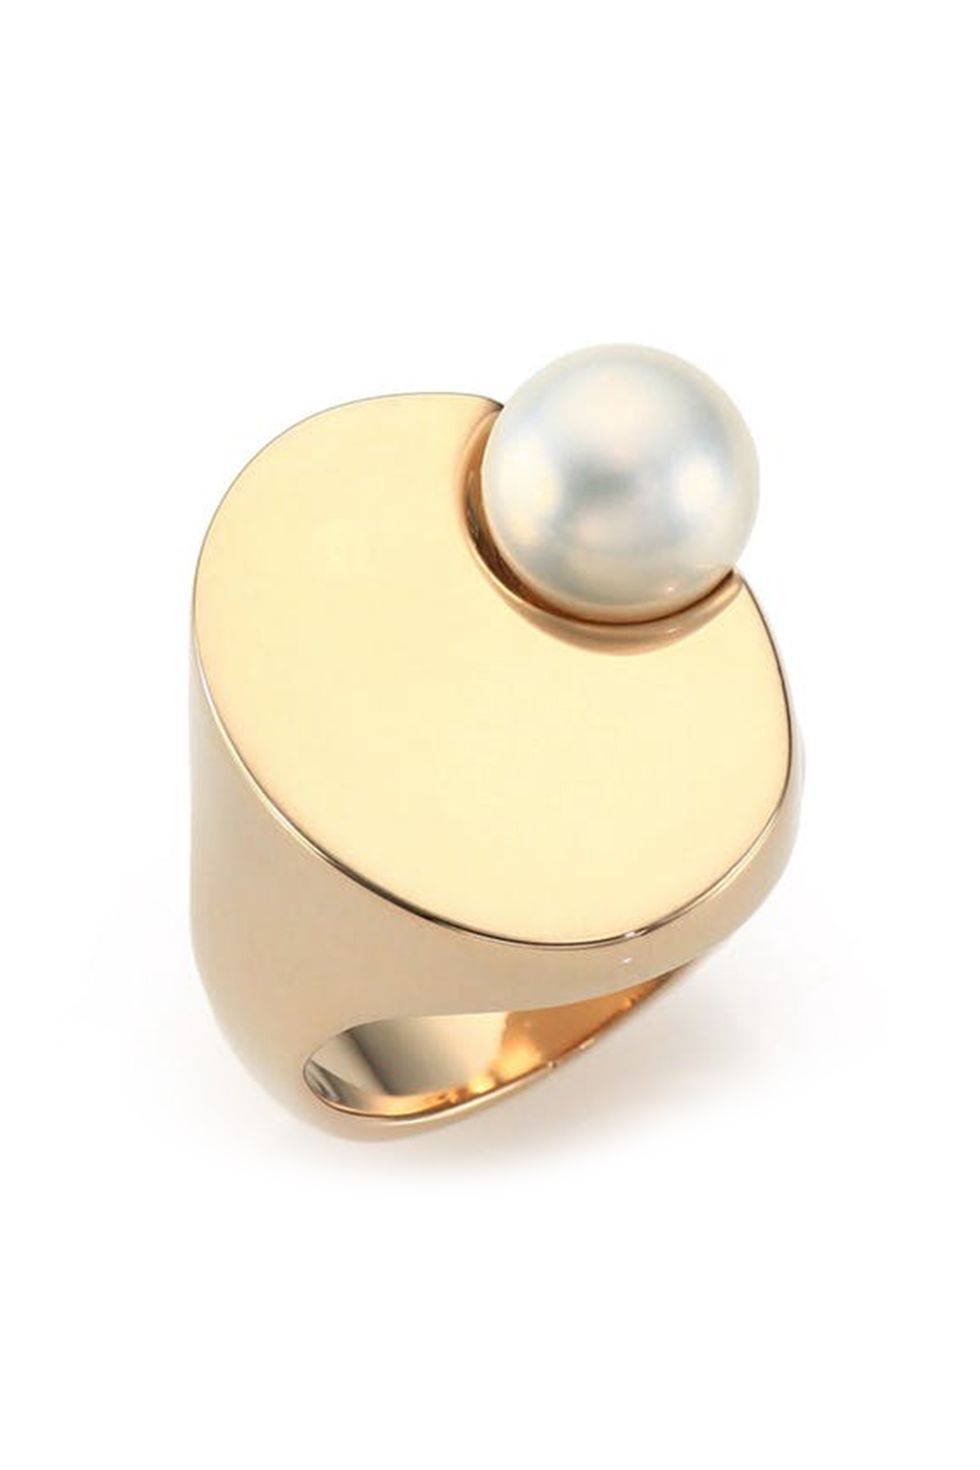 Pearl, Jewellery, Fashion accessory, Gemstone, Ring, Gold, Metal, Beige, Natural material, Brass, 